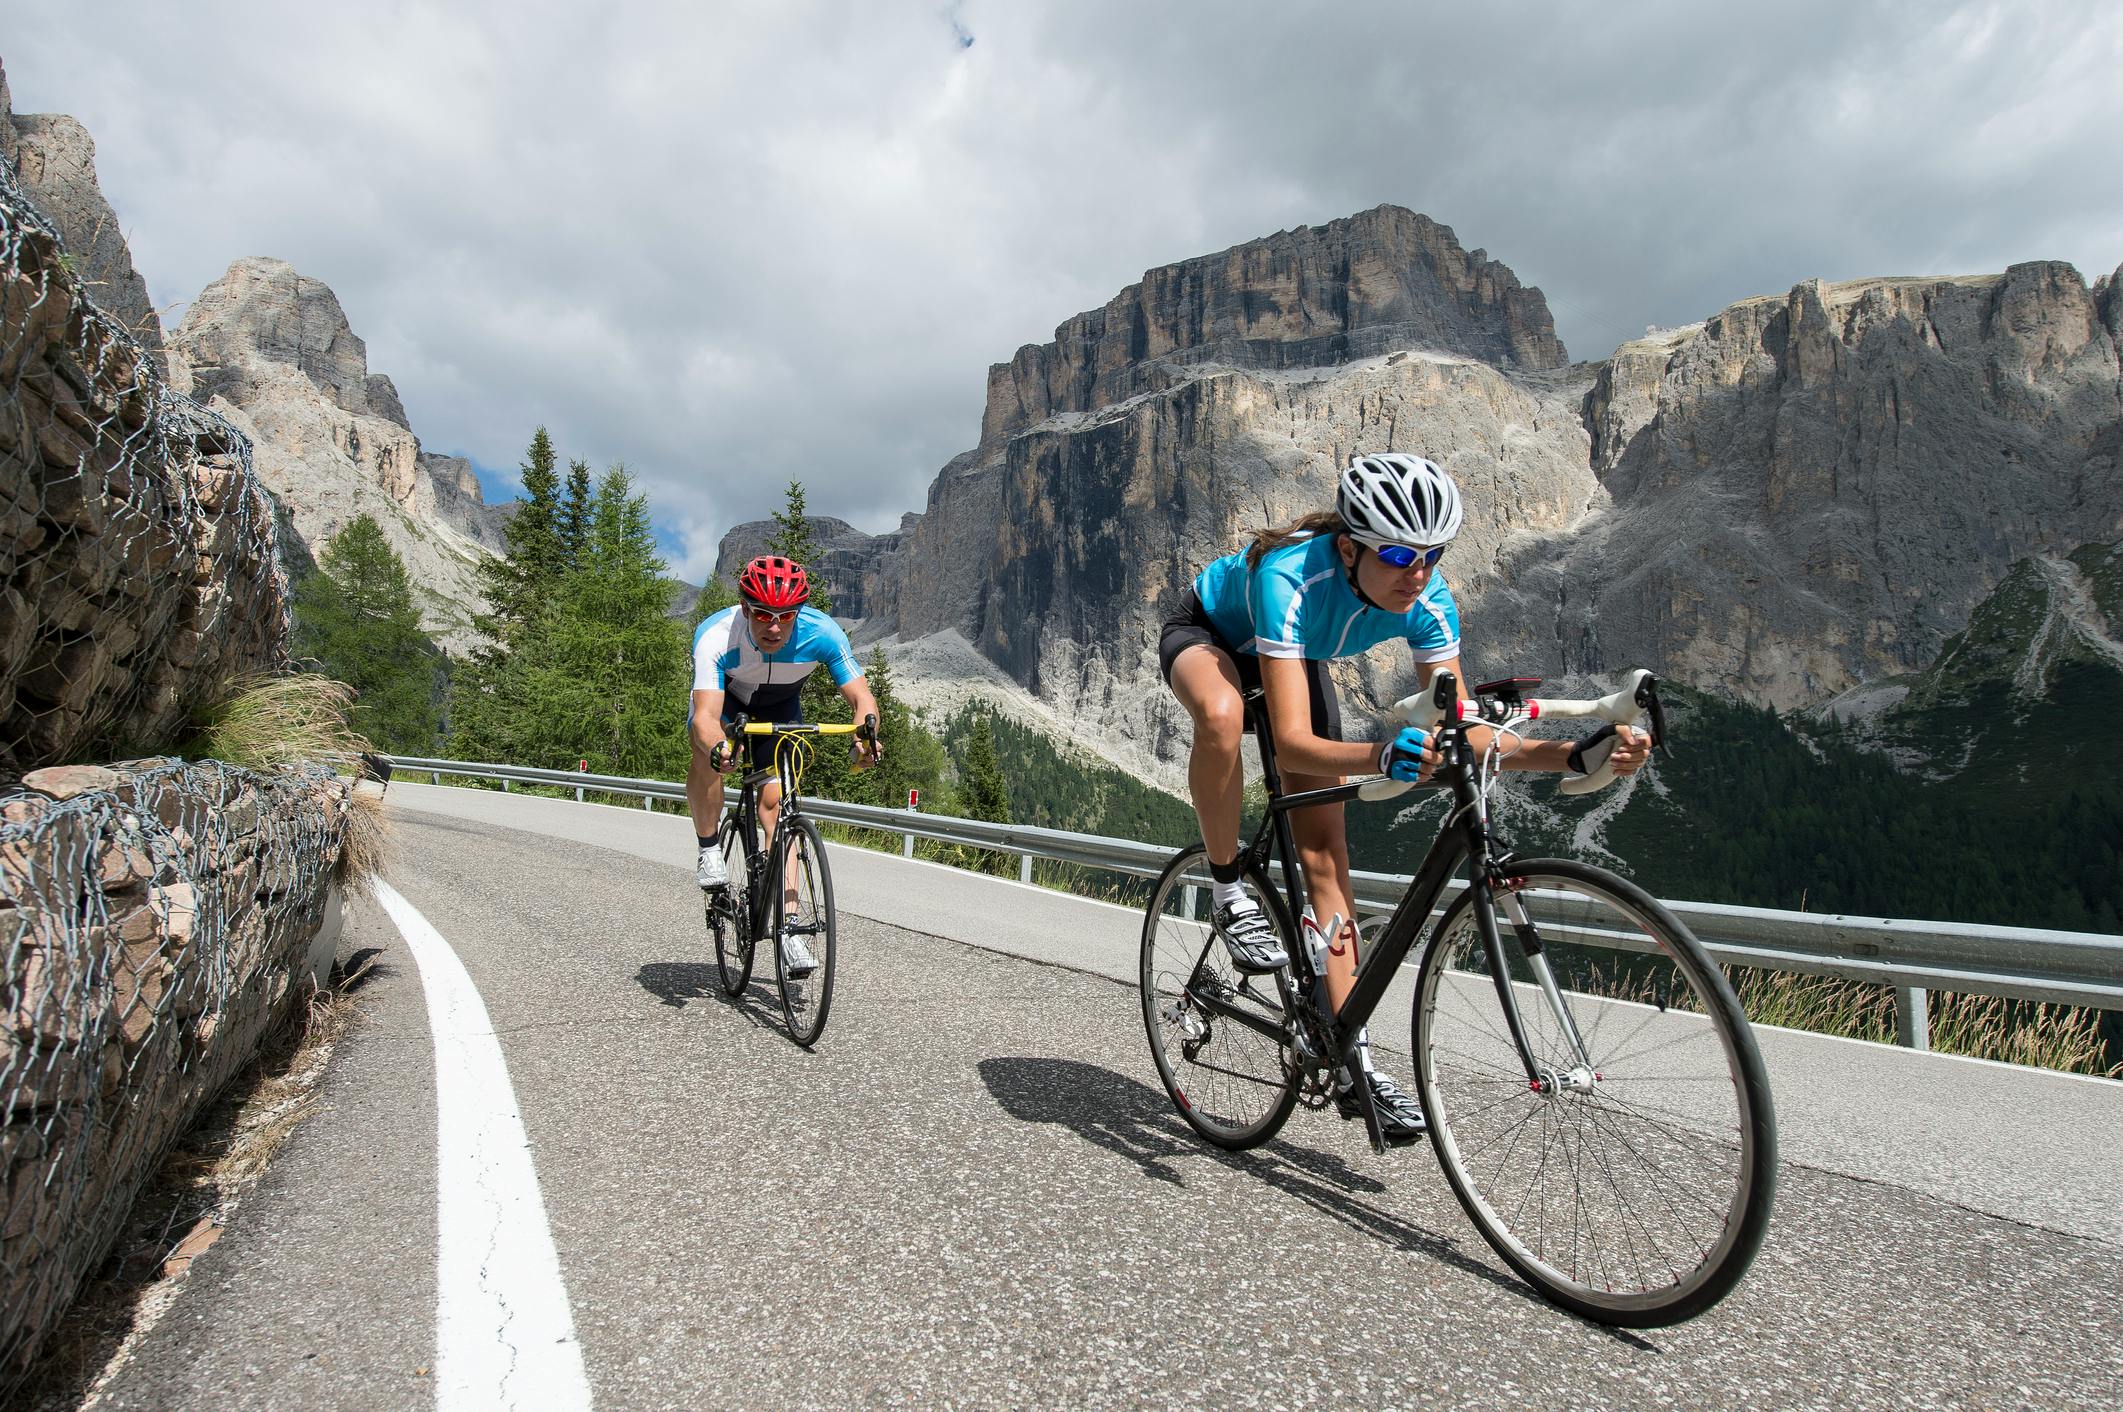 Two cyclists ride up a paved road with mountains in the background